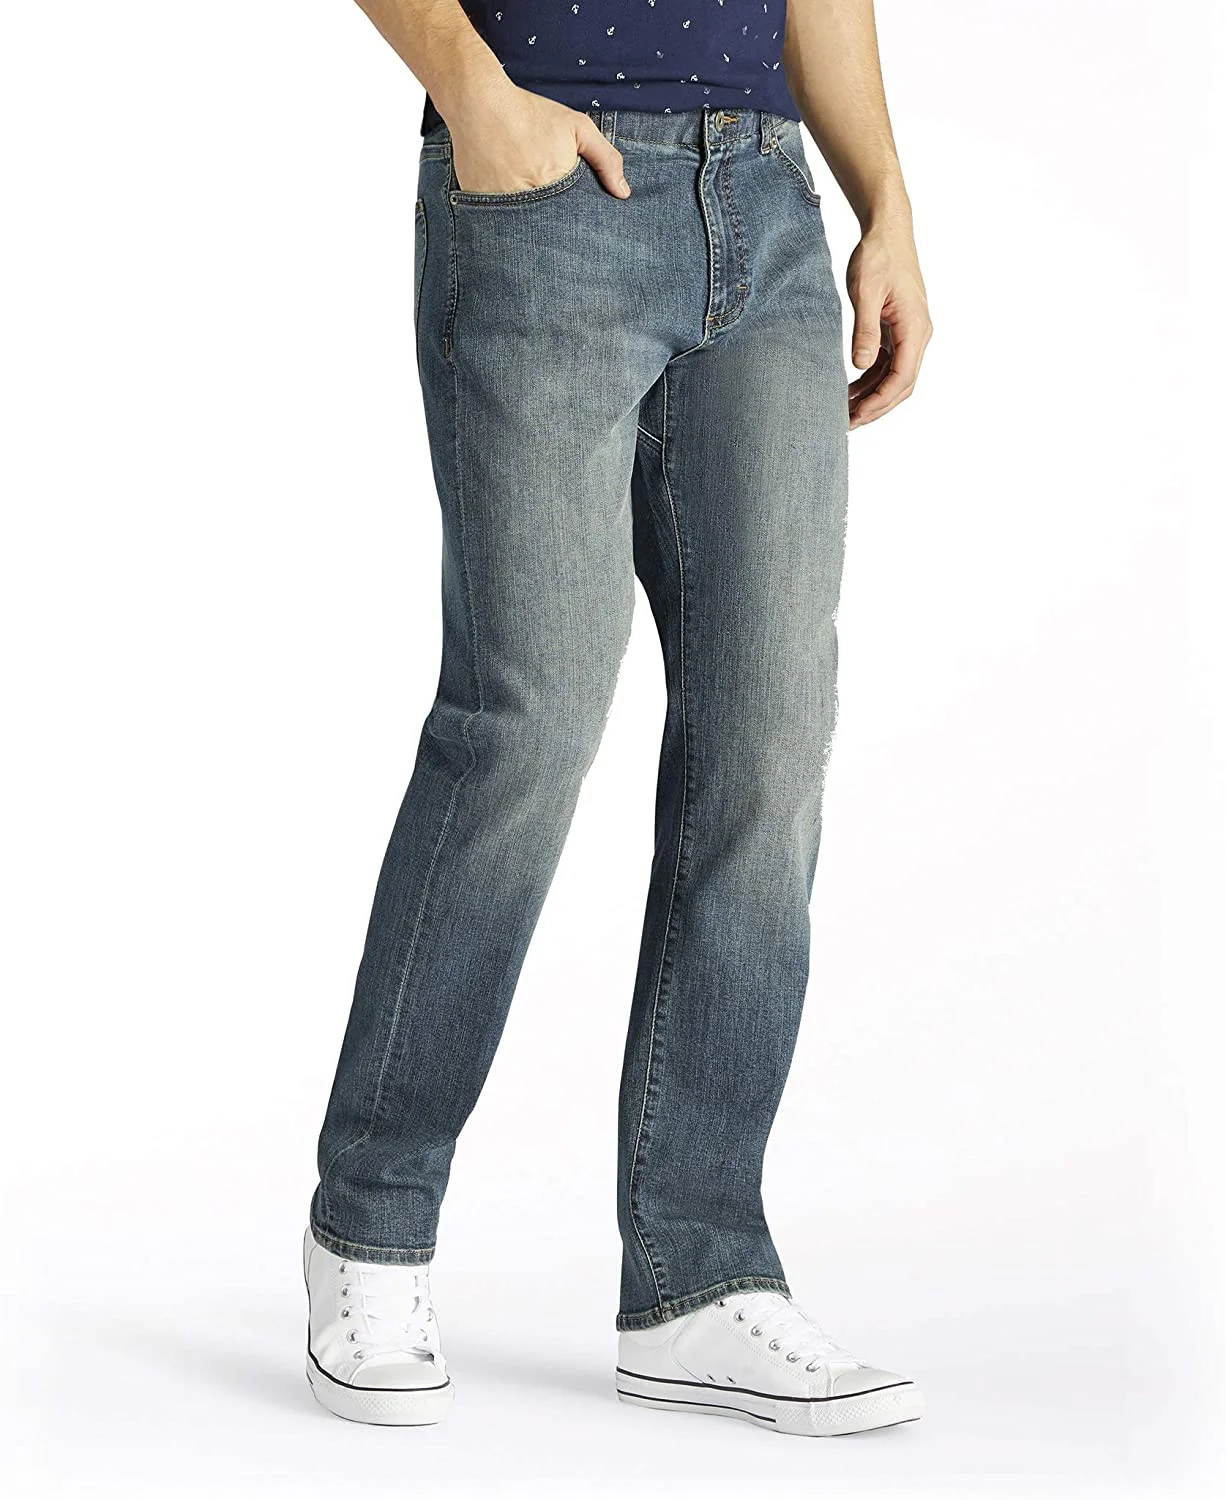 Wholesale Mens Athletic Fit Tapered Leg Jean Manufacturer In Bangladesh Factory And Supplier